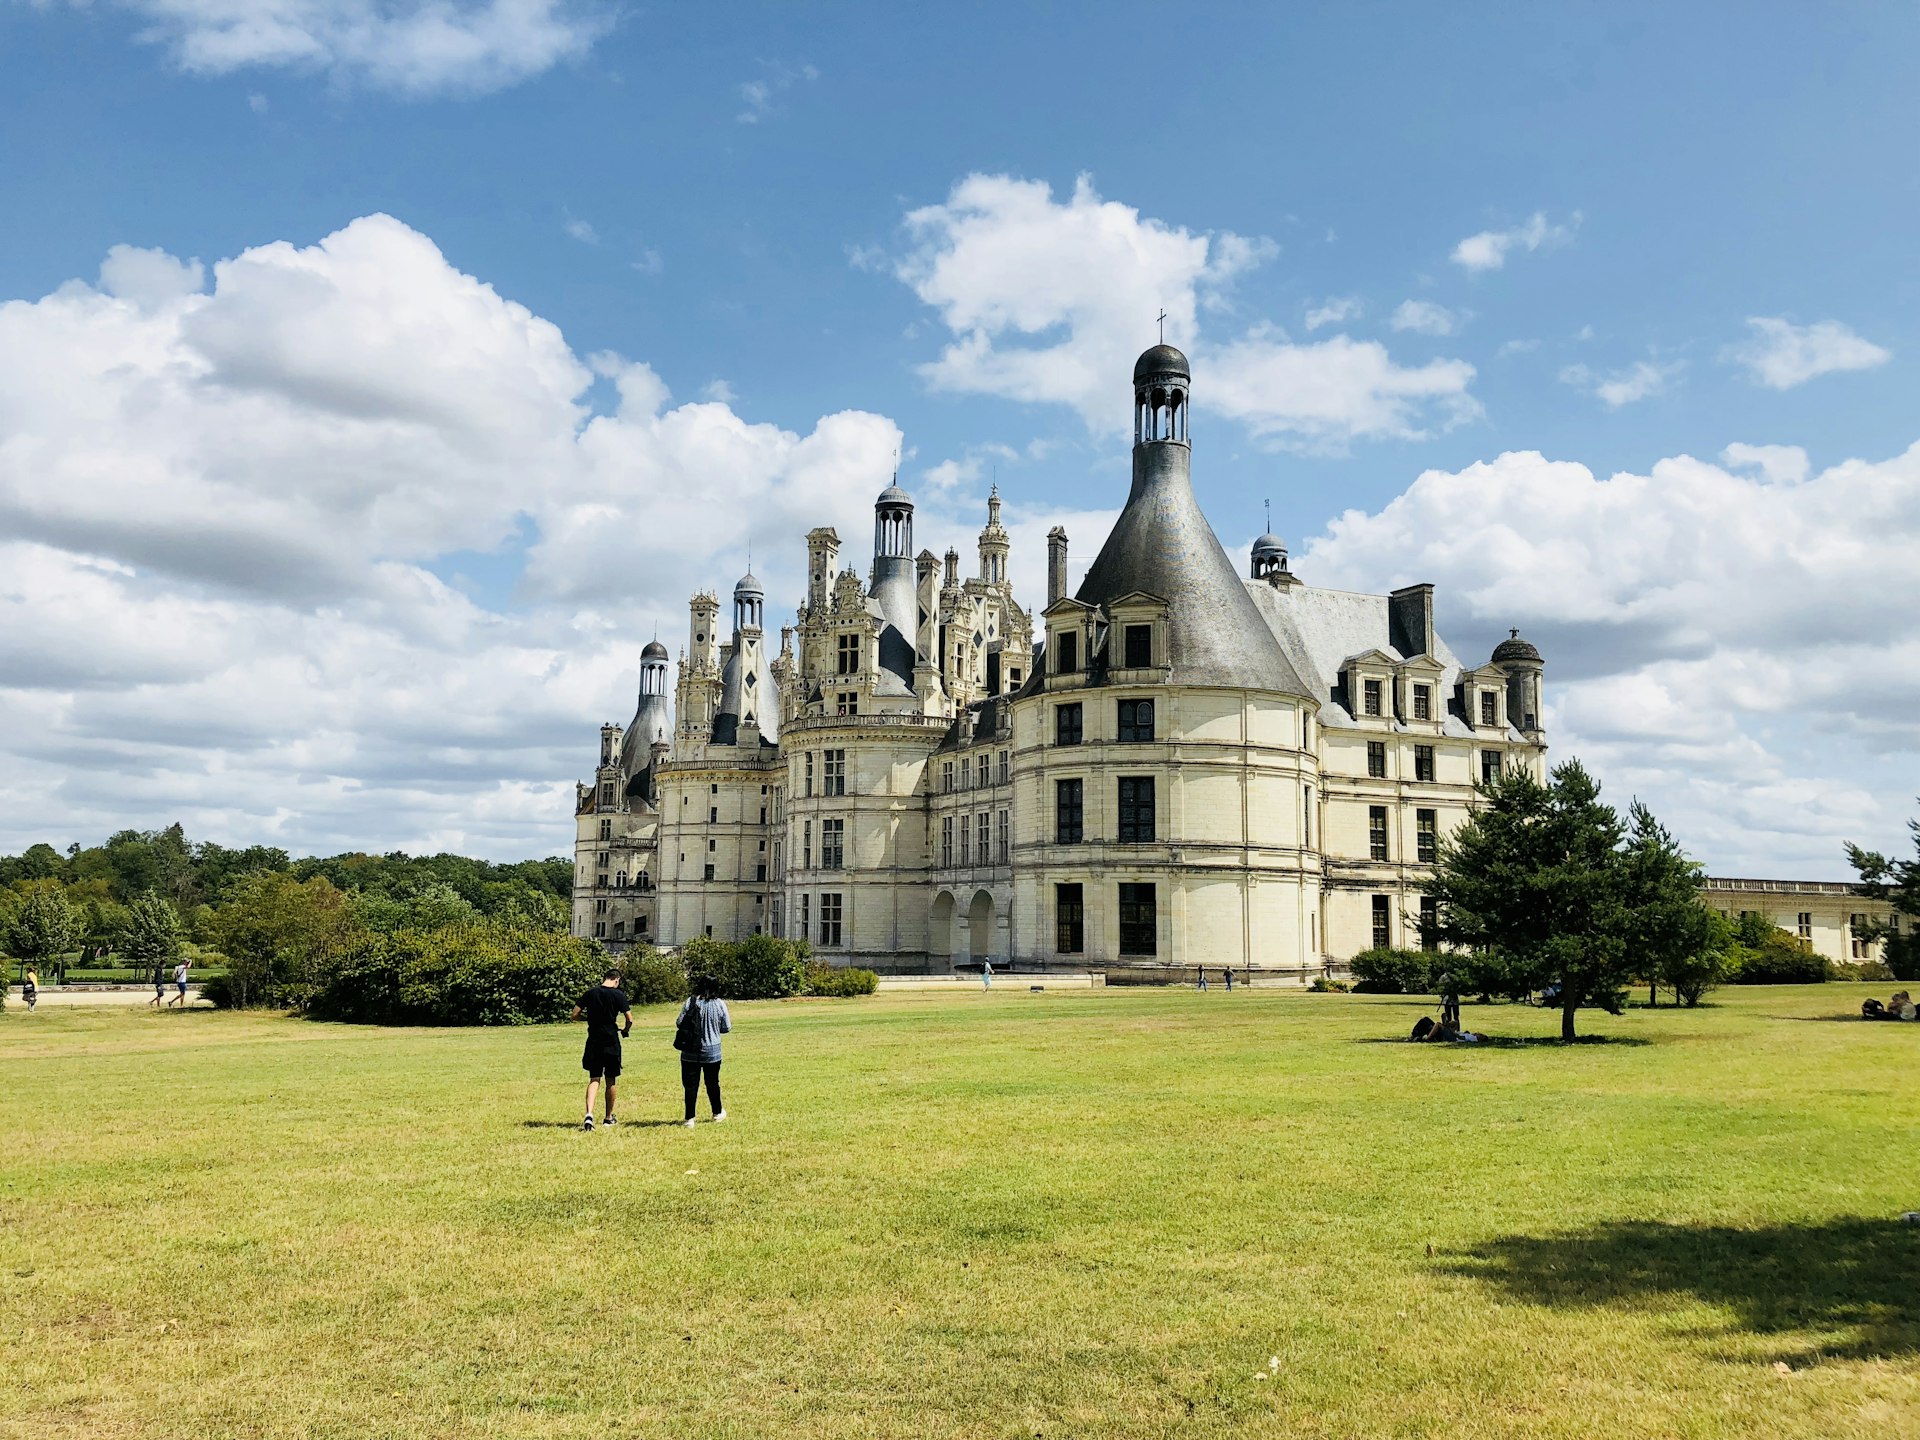 Two tourists admire the Chambord Castle in the Loire Valley